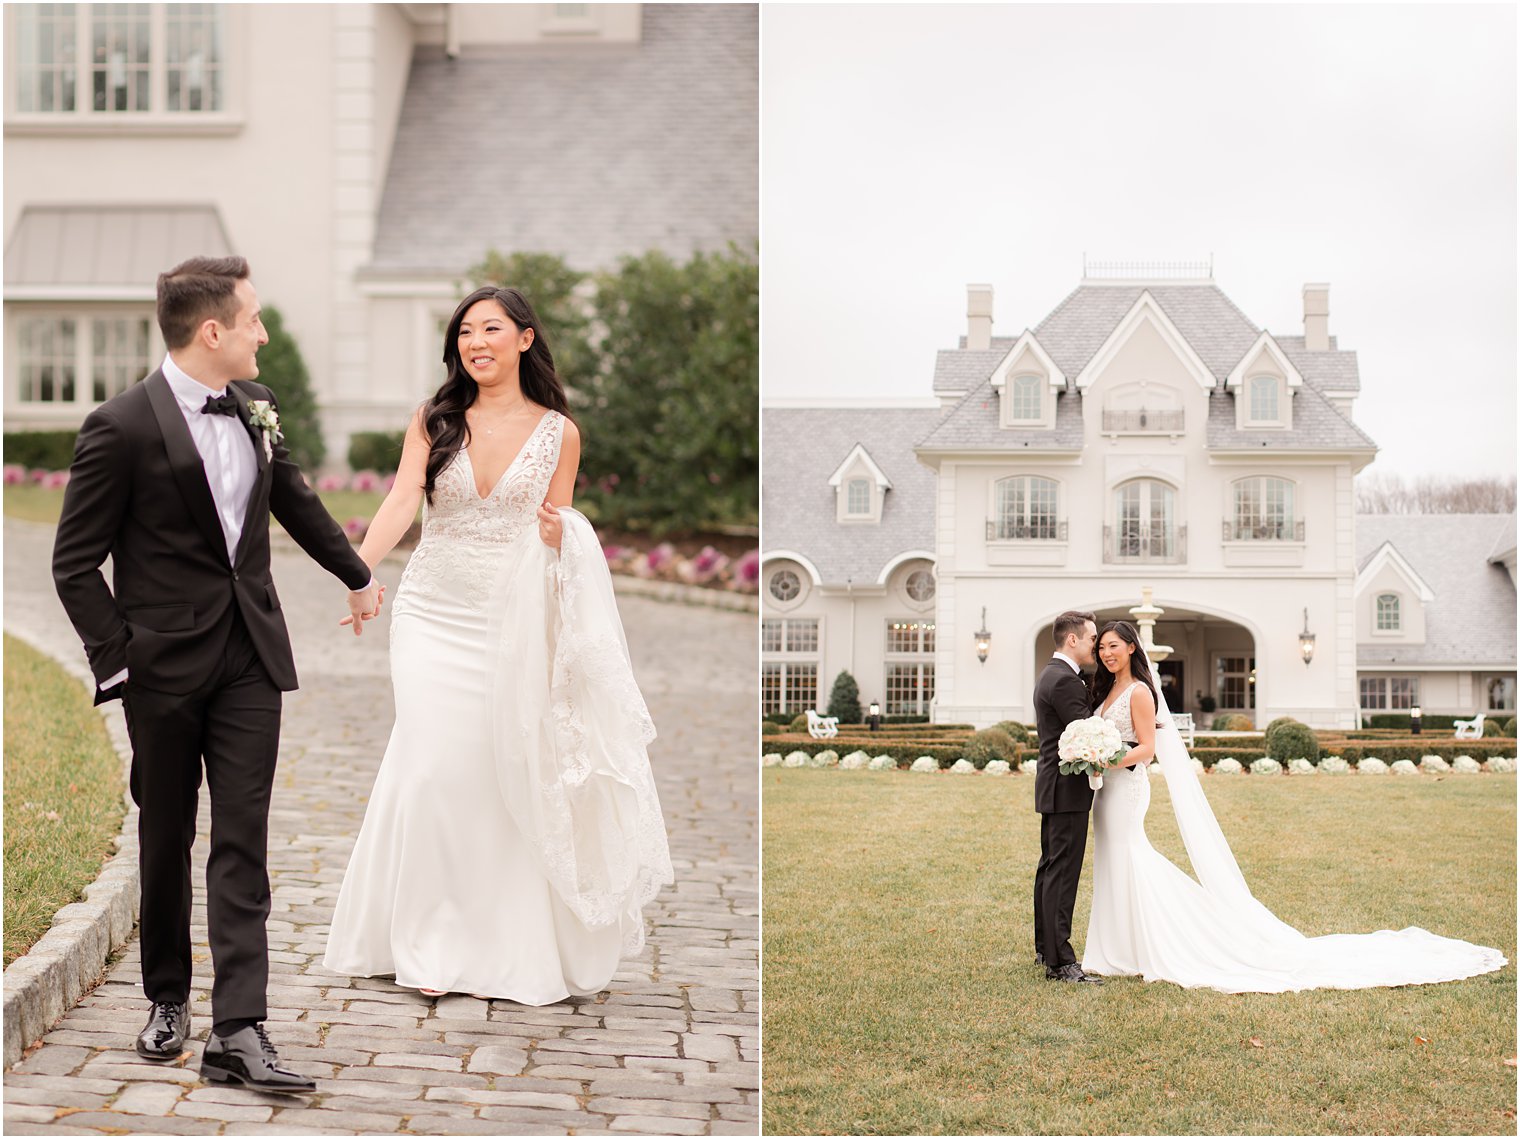 Formal bride and groom portraits on wedding day at Park Chateau Estate